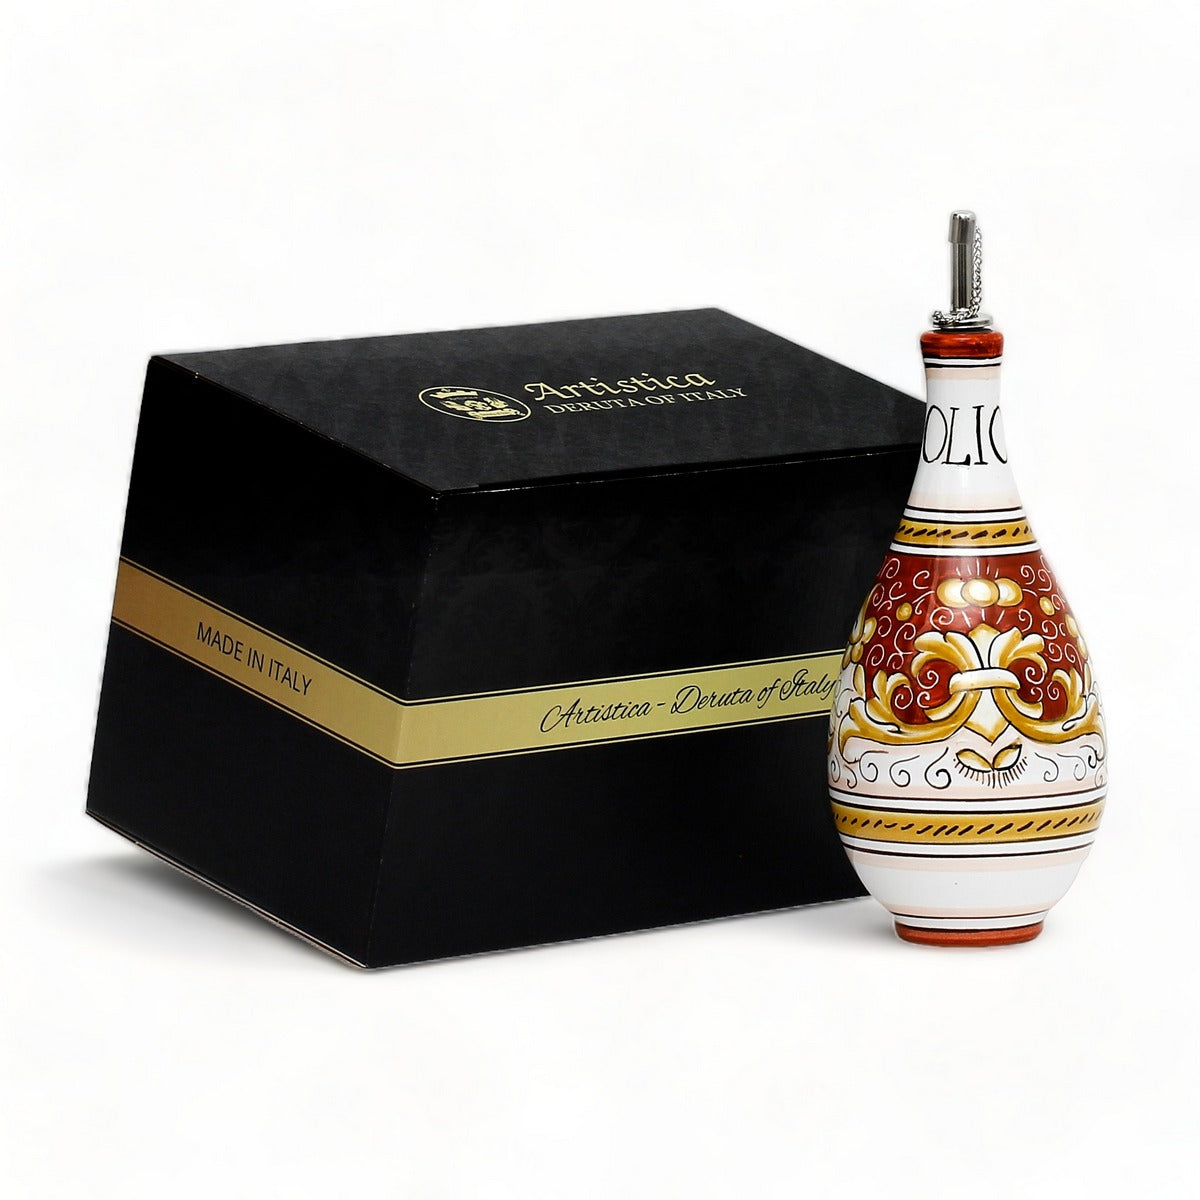 GIFT BOX: With authentic Deruta hand painted ceramic - DERUTA COLORI: OLIVE OIL DISPENSER BOTTLE CORAL RED